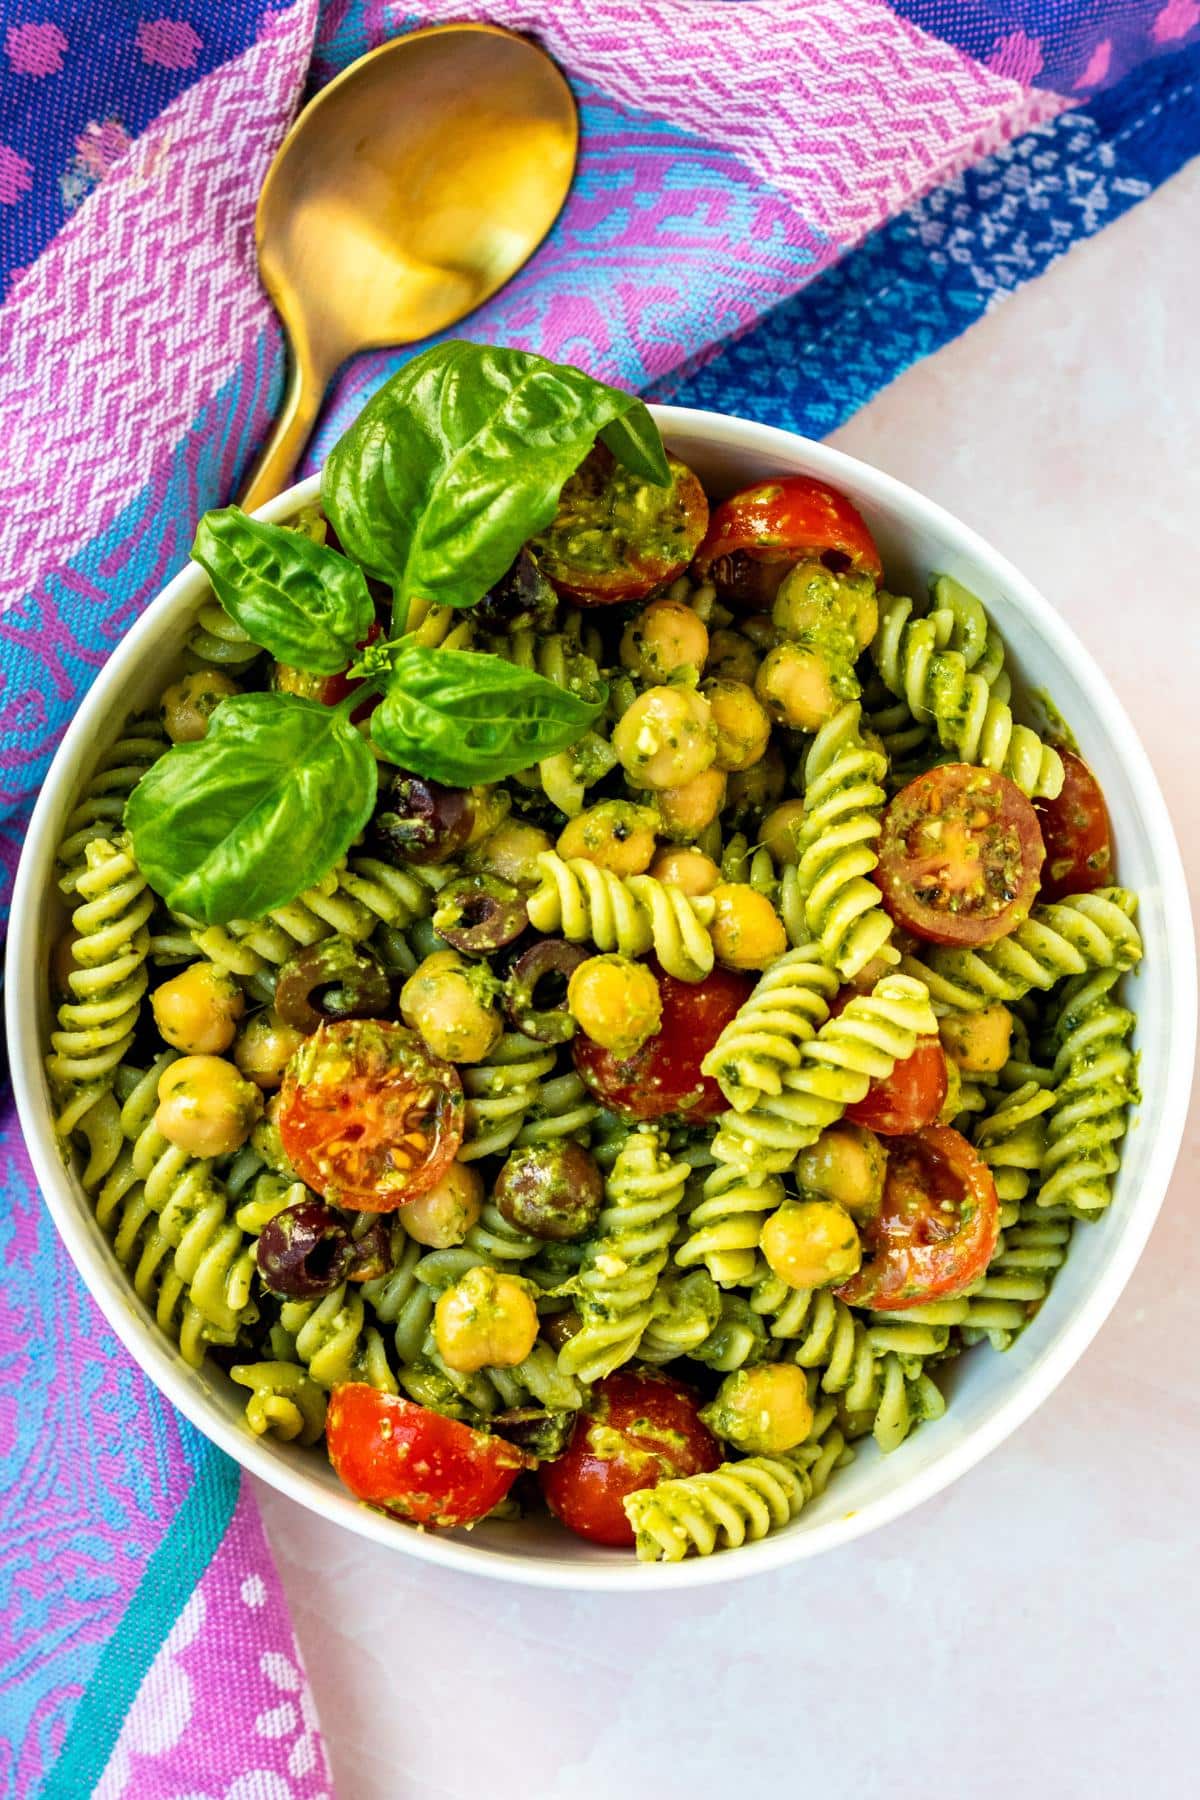 Bowl of pasta salad made with corkscrew noodles, cherry tomatoes, chickpeas, olives, and pesto sauce.